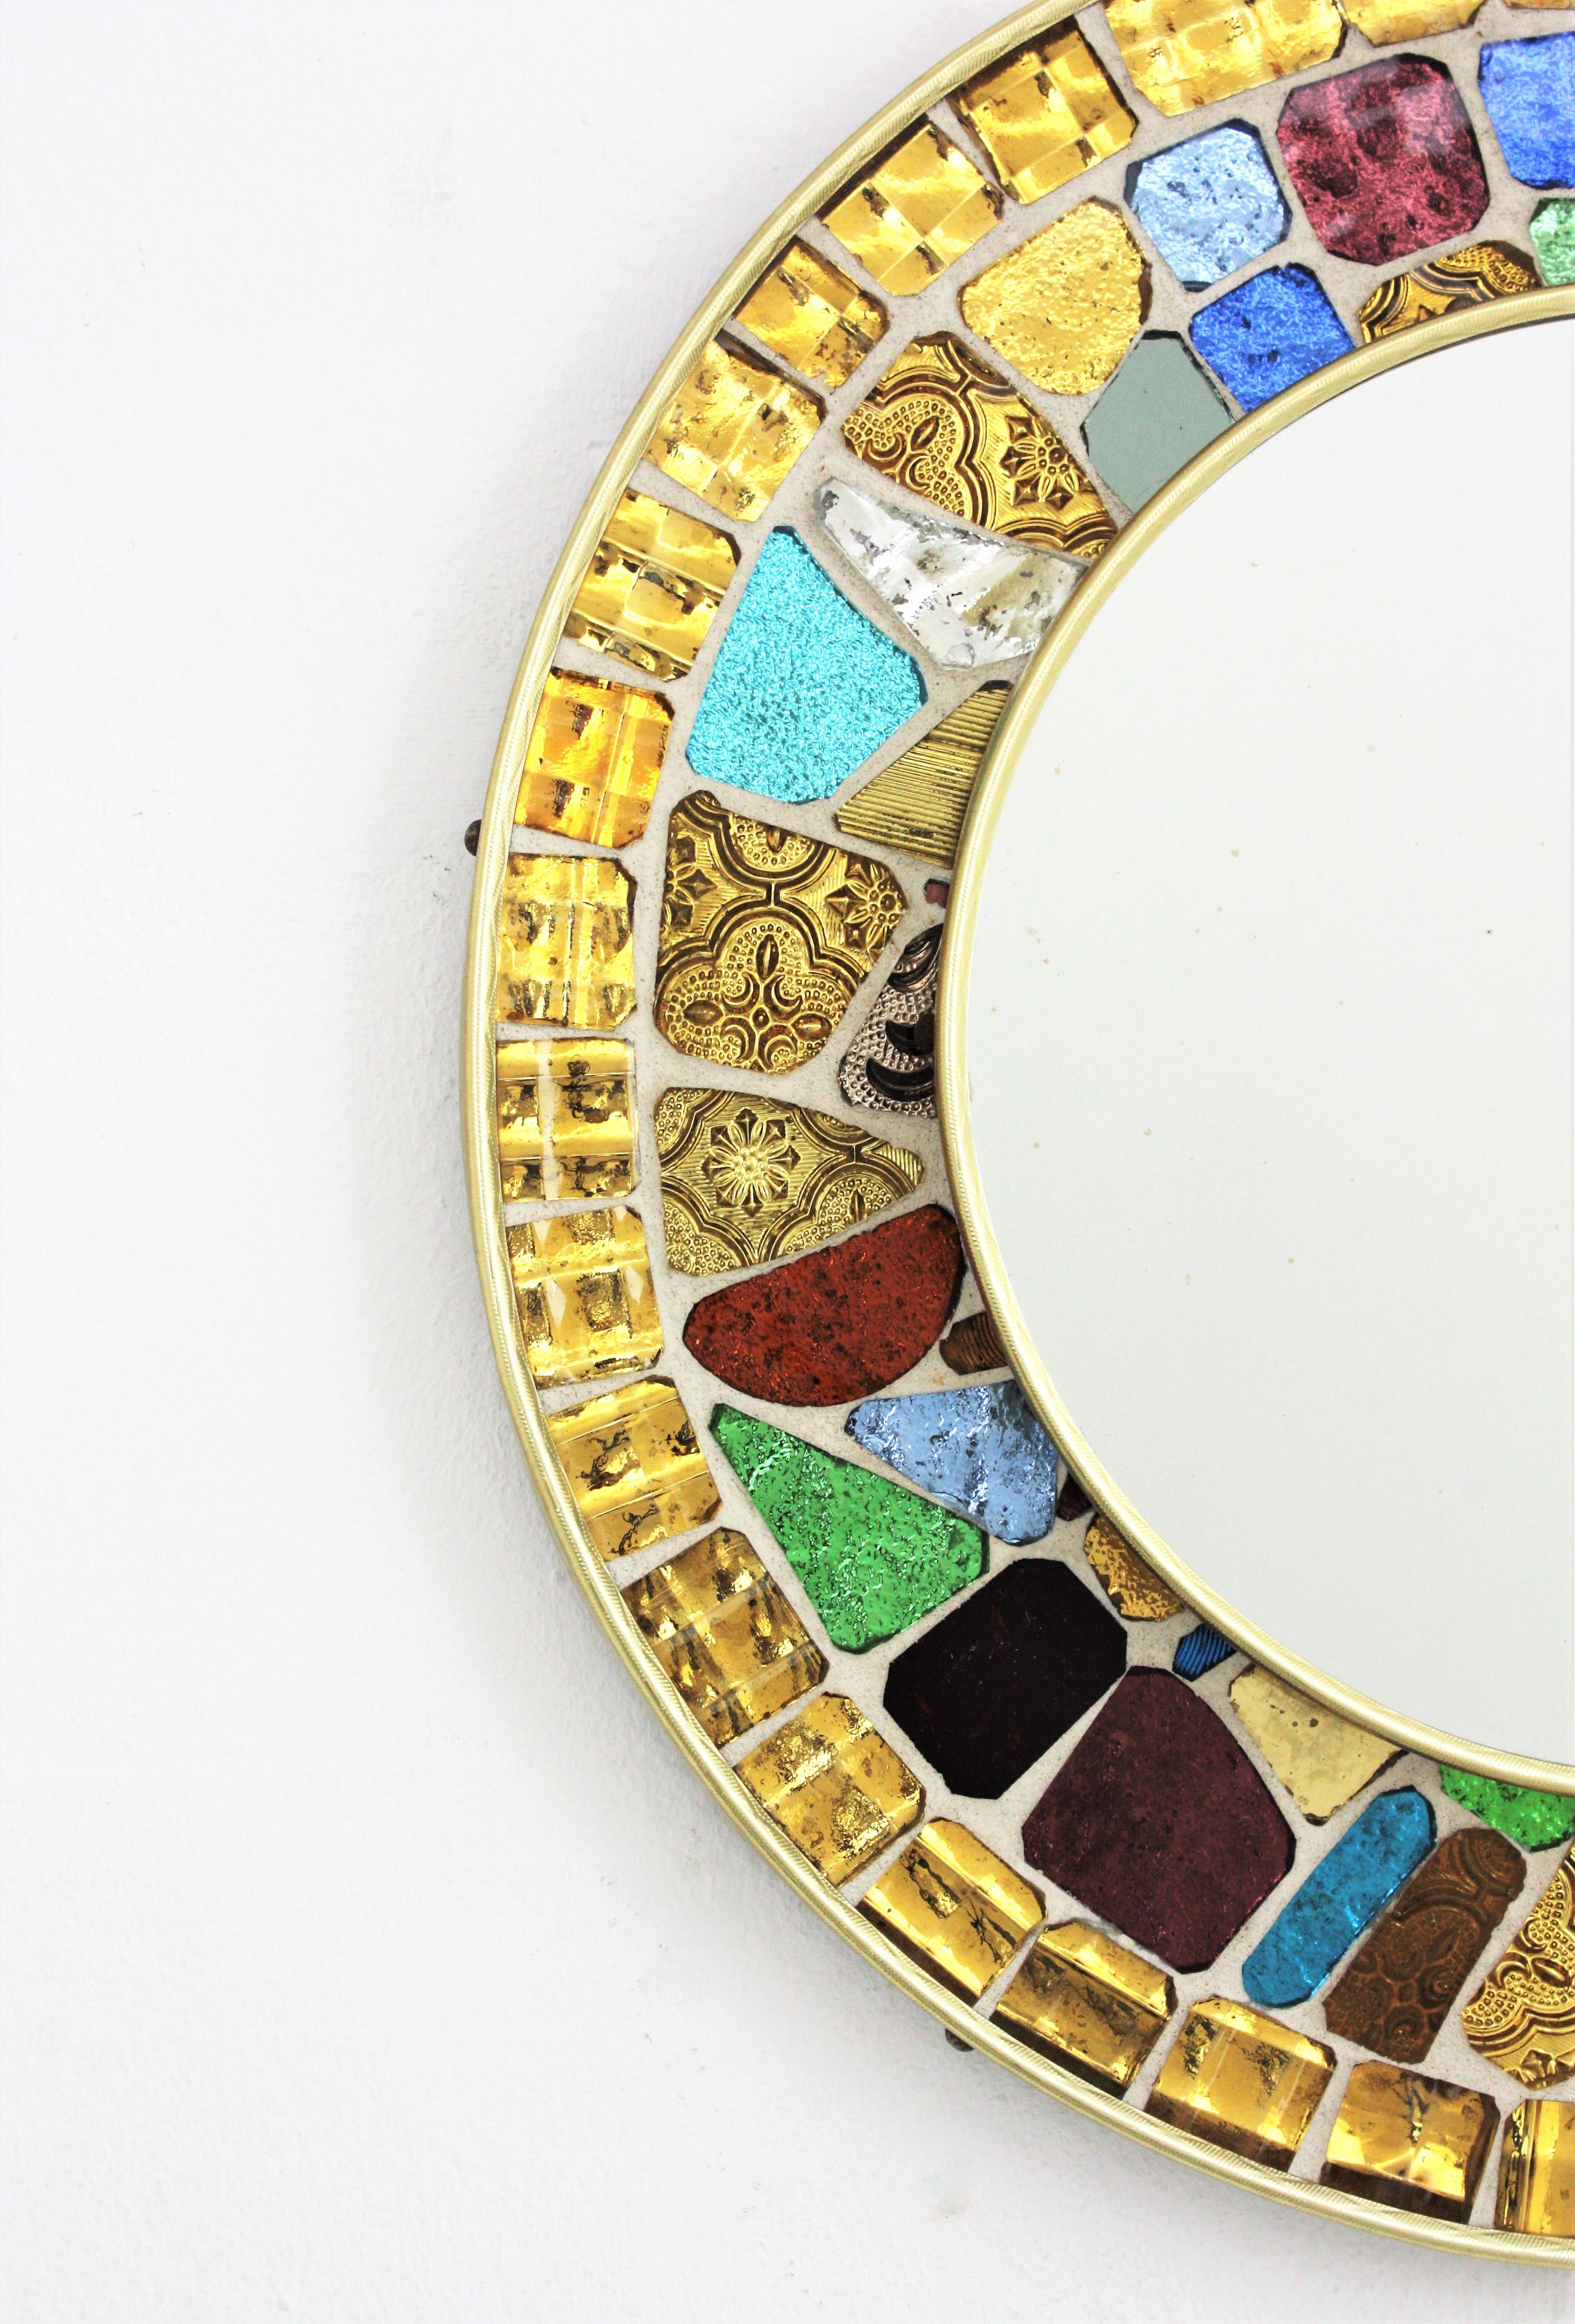 Mid-Century Modern Midcentury Round Mirror with Muti Color Glass Mosaic Frame, 1960s For Sale